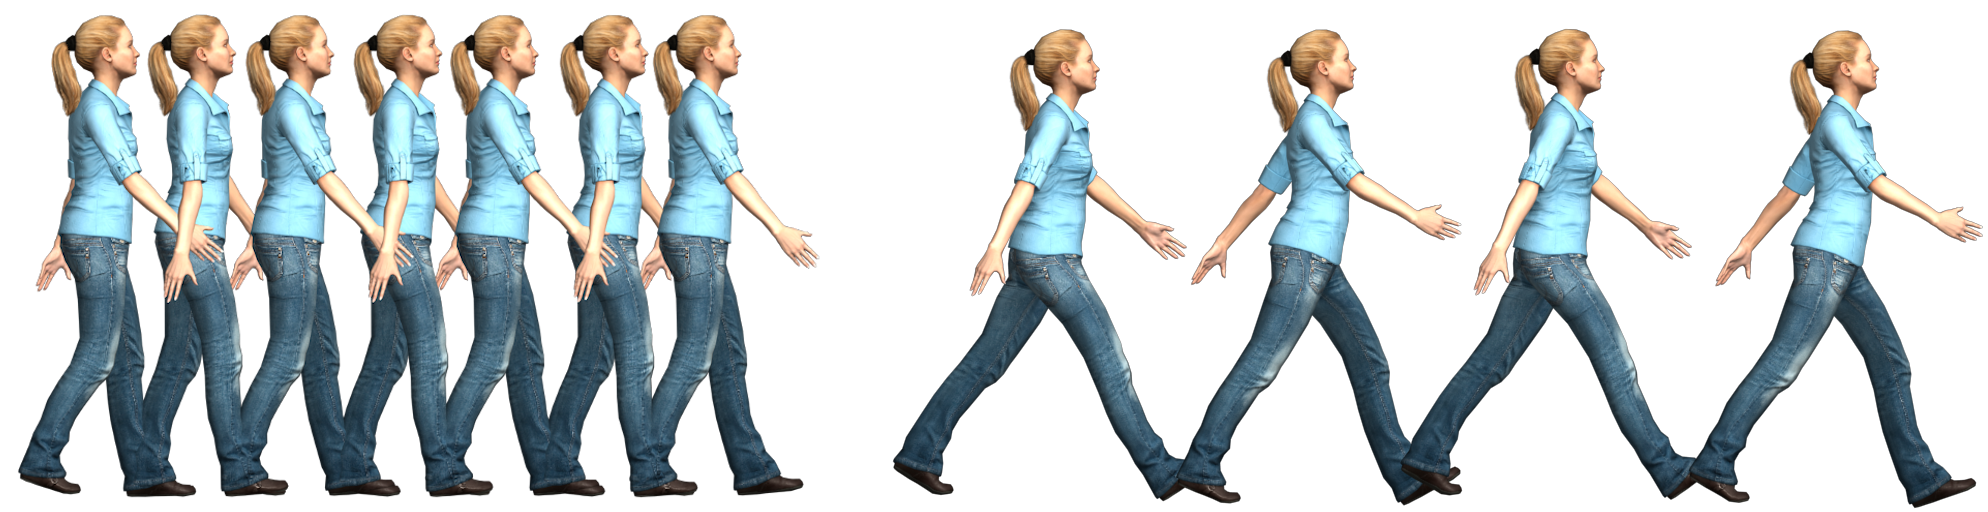 We are interested in whether observers are able to recognize the natural Walk Ratio of an individual, an invariant parameter of human walking (ratio between step length and step frequency), when motions are displayed on virtual characters. In particular, the Walk Ratio represents the fact that different combinations of step length and step frequency can be selected by people to walk at a given speed, e.g., small steps at a high cadence (left) or longer steps at a lower cadence (right).